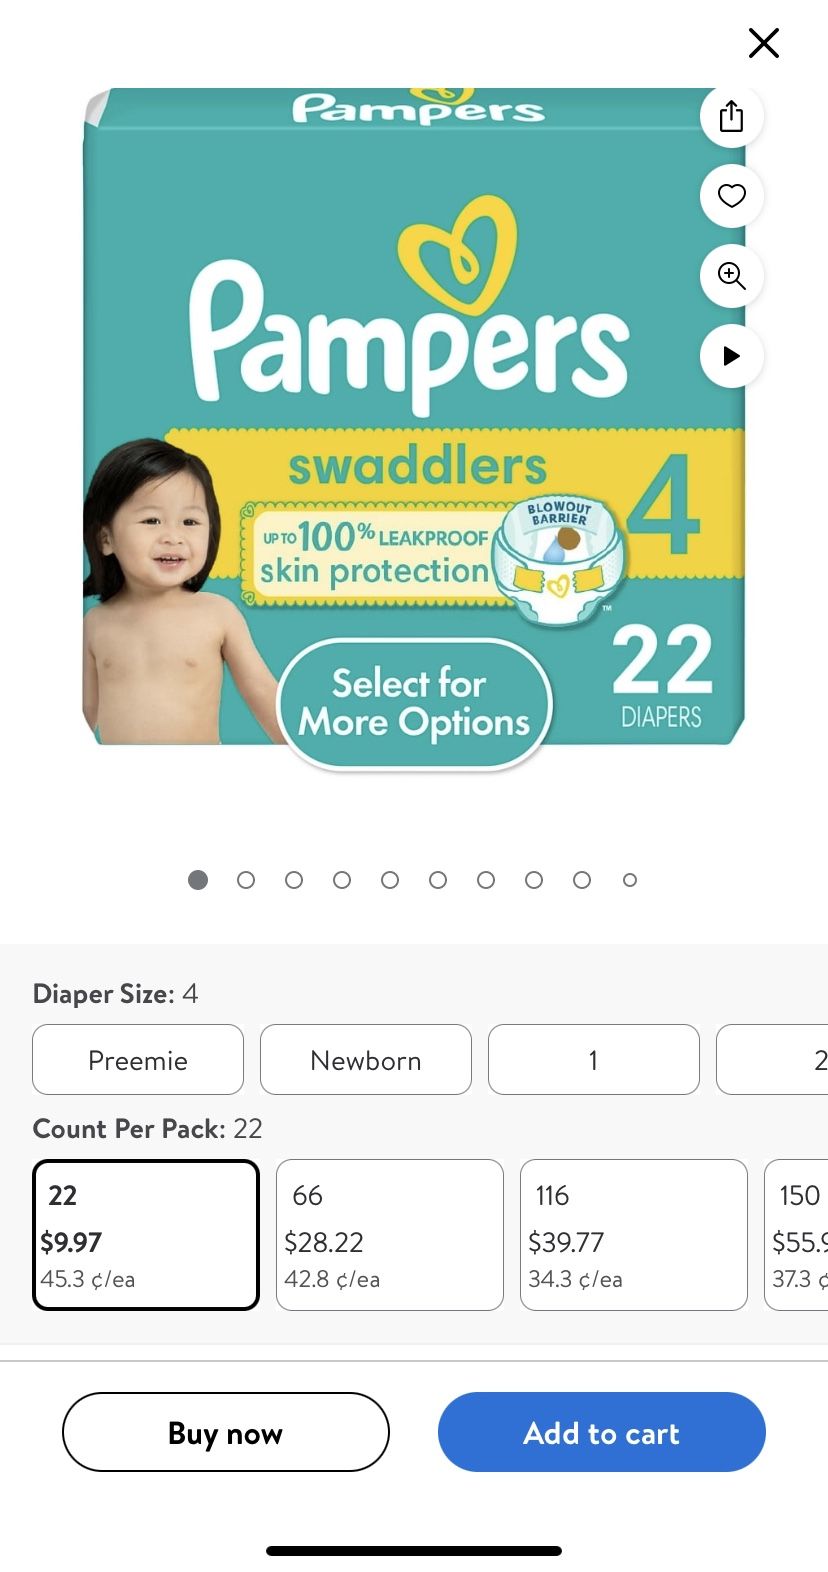 New Pampers Swaddlers Size 4, 22 Diapers